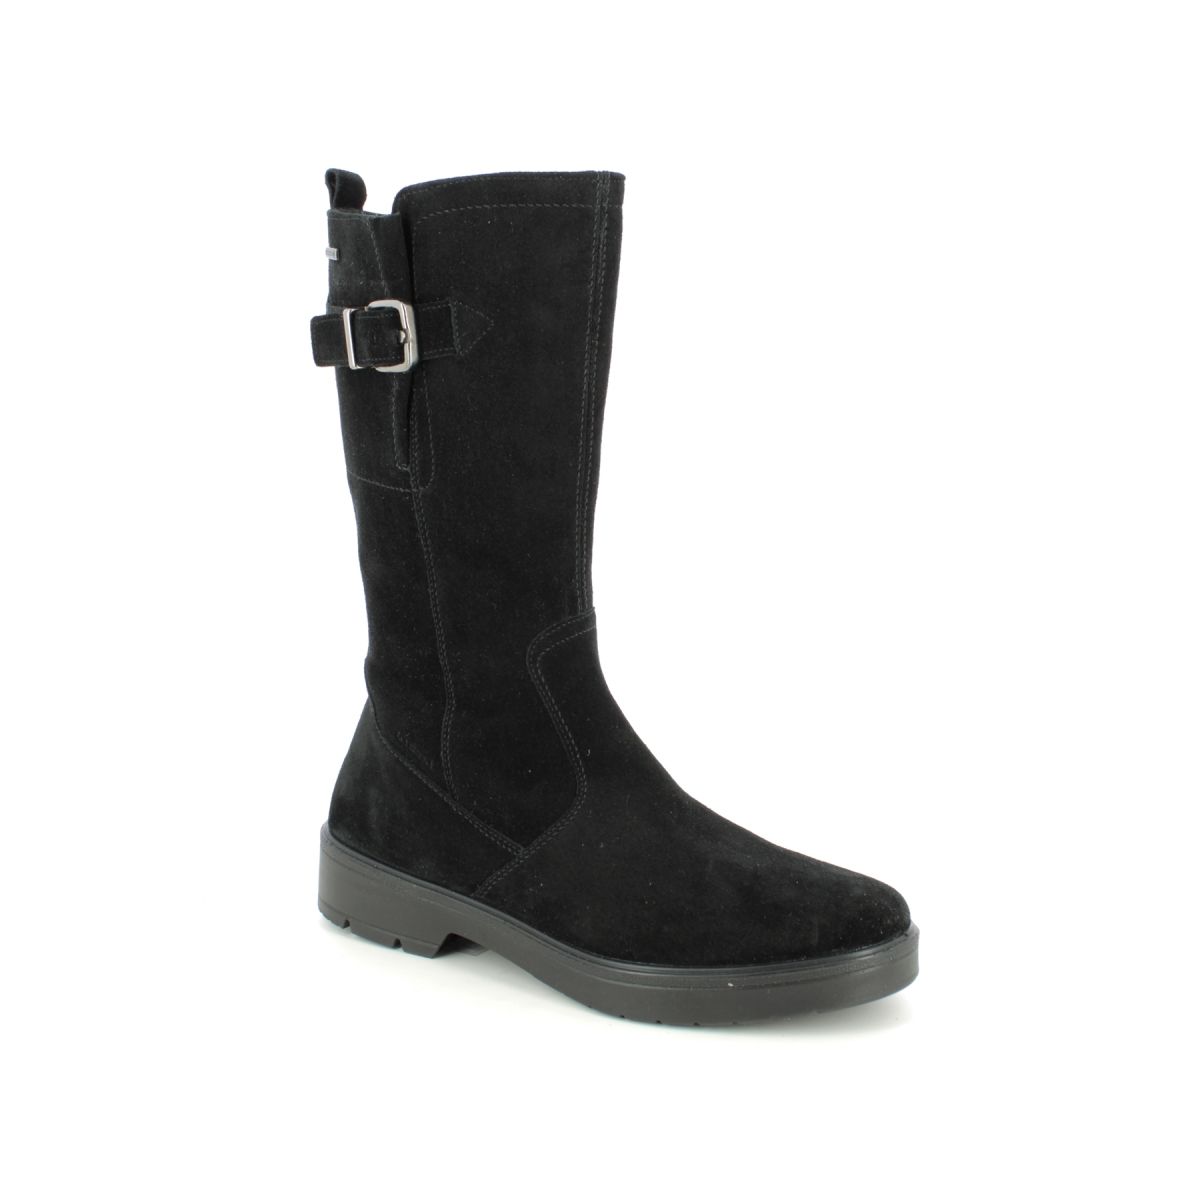 Legero Mystic Mid Gtx Black Suede Womens Mid Calf Boots 2000196-0000 In Size 4.5 In Plain Black Suede